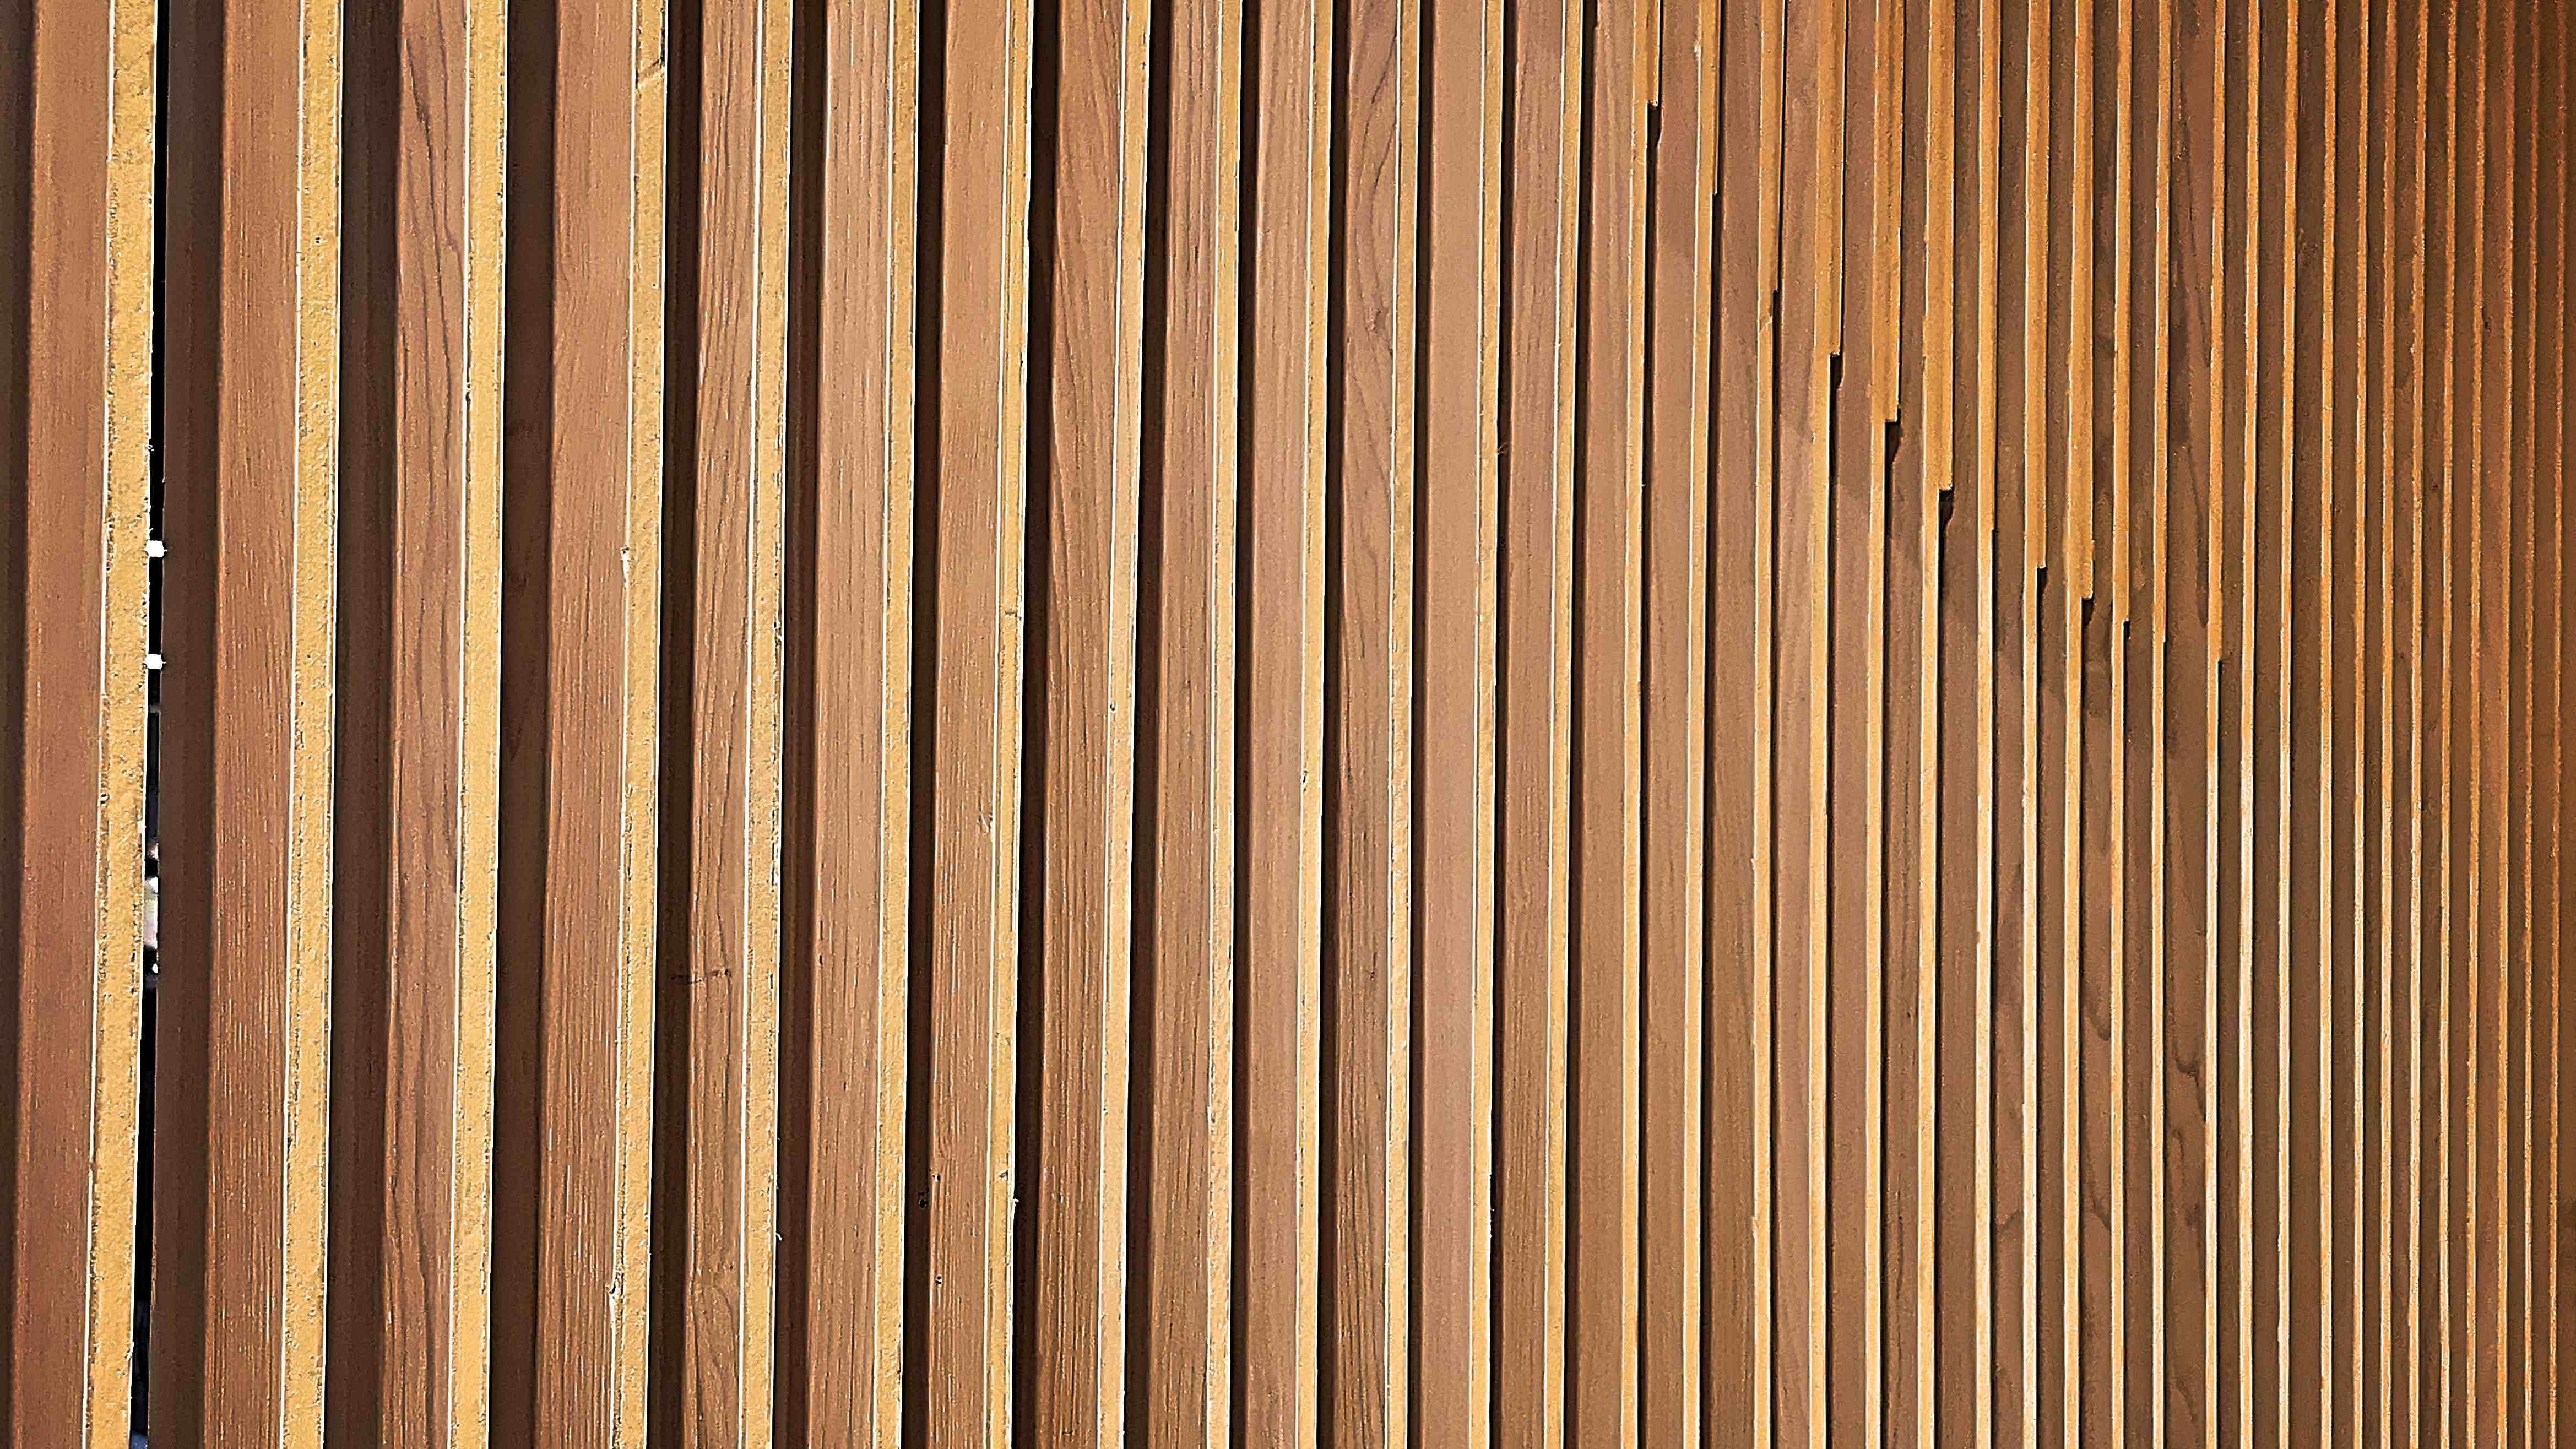 Wooden Wall Partition, Room Divider, Floor To Ceiling Wooden Slats